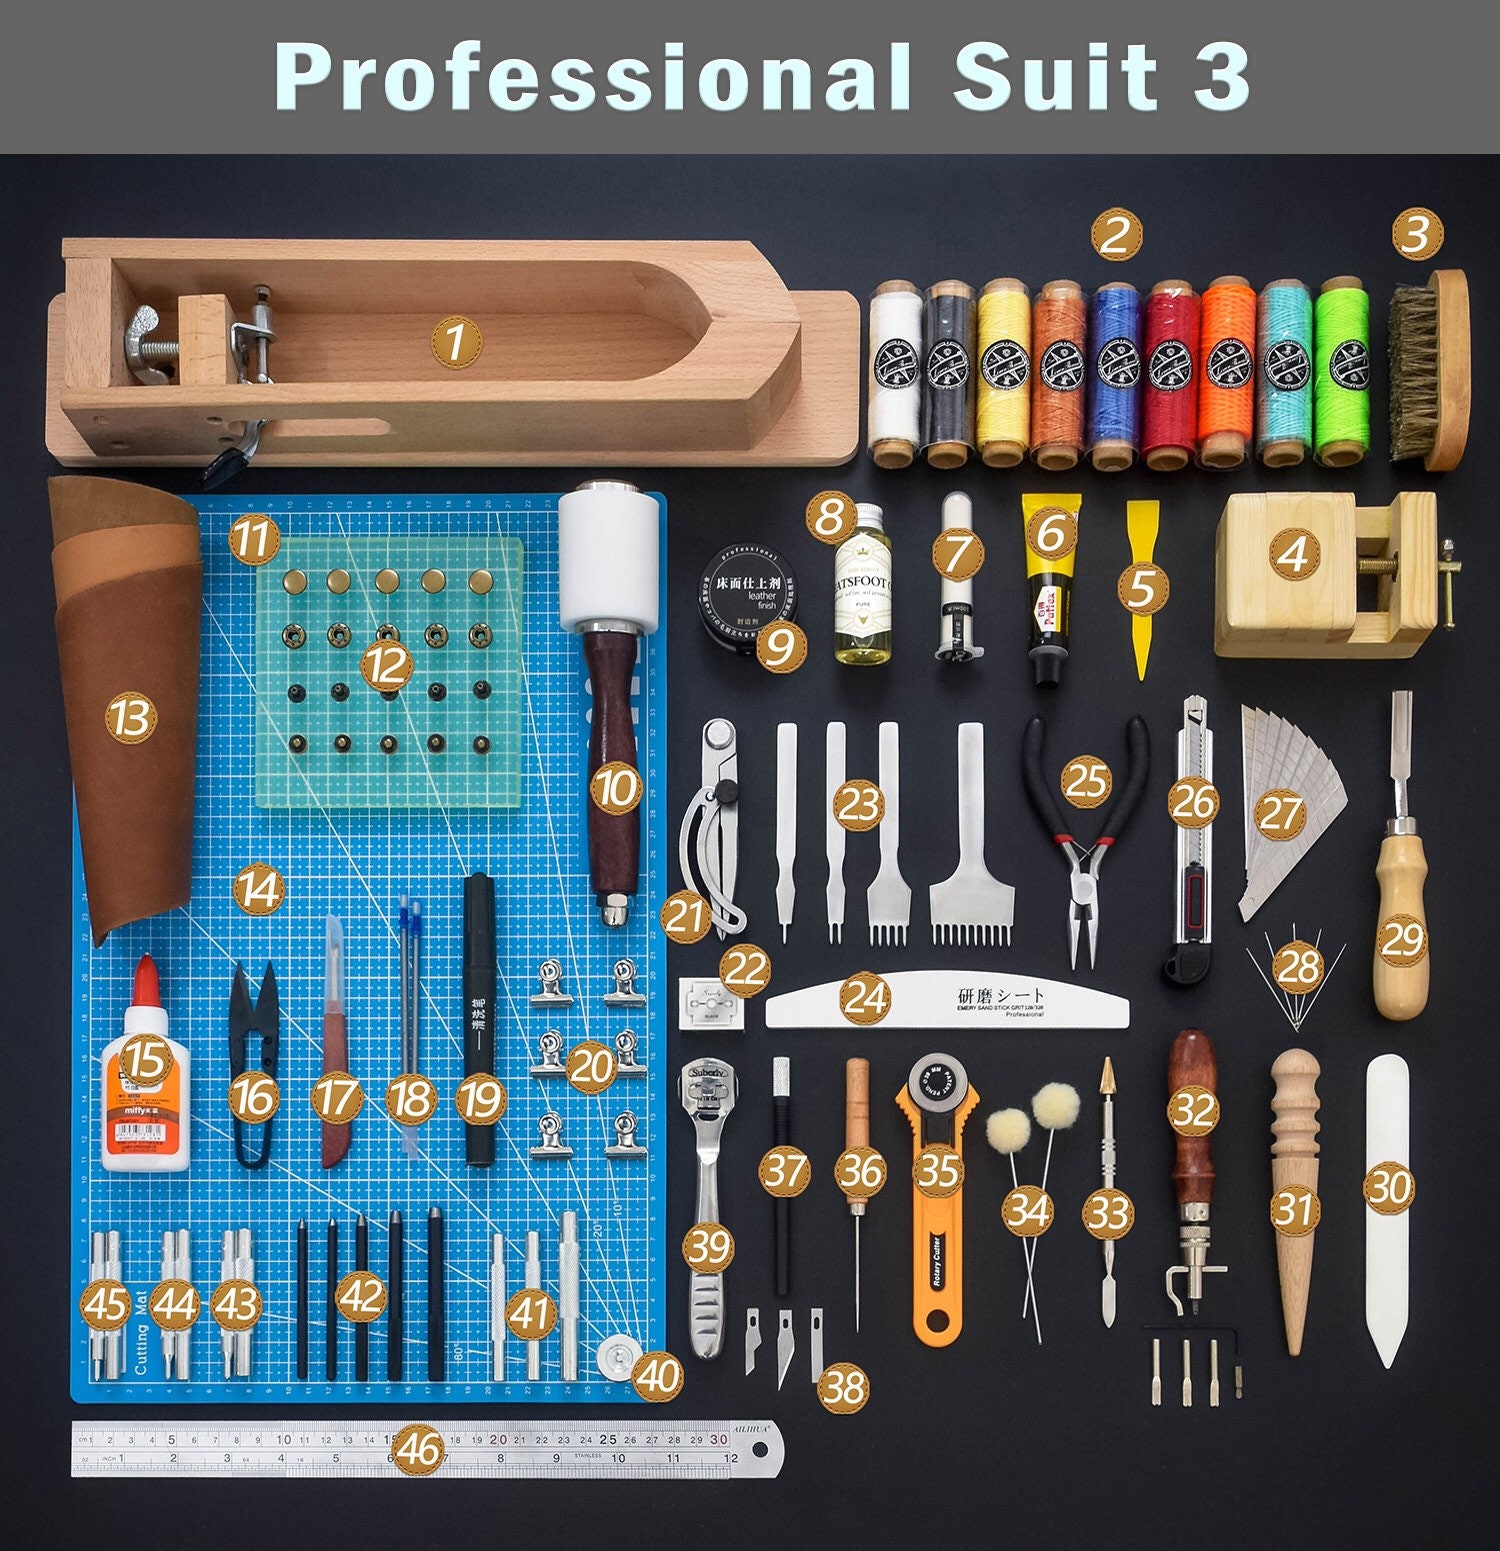 LMDZ 34Pcs Leather Working Kit Leather Starter Kit Leather Stitching Kit  Leather Burning Tool Leather Crafting for Beginner - AliExpress